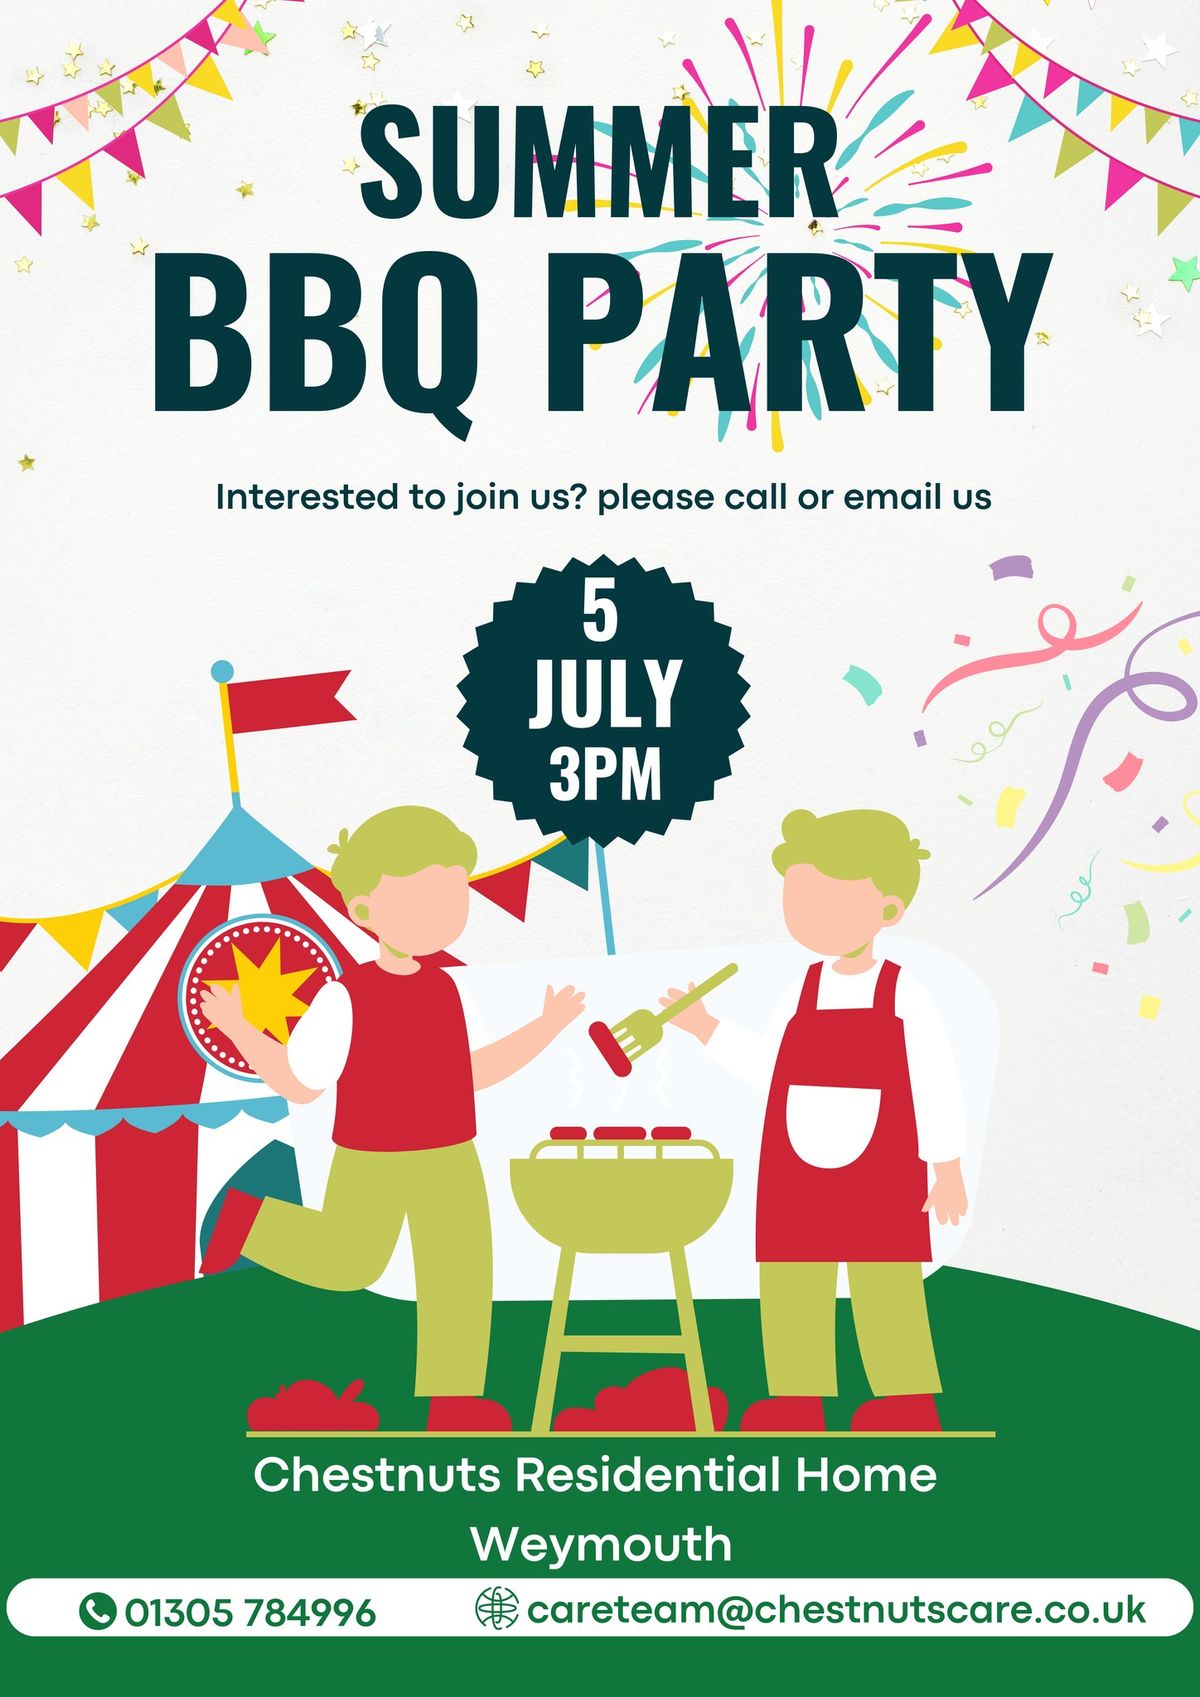  Chestnuts Summer BBQ Party - 5th July